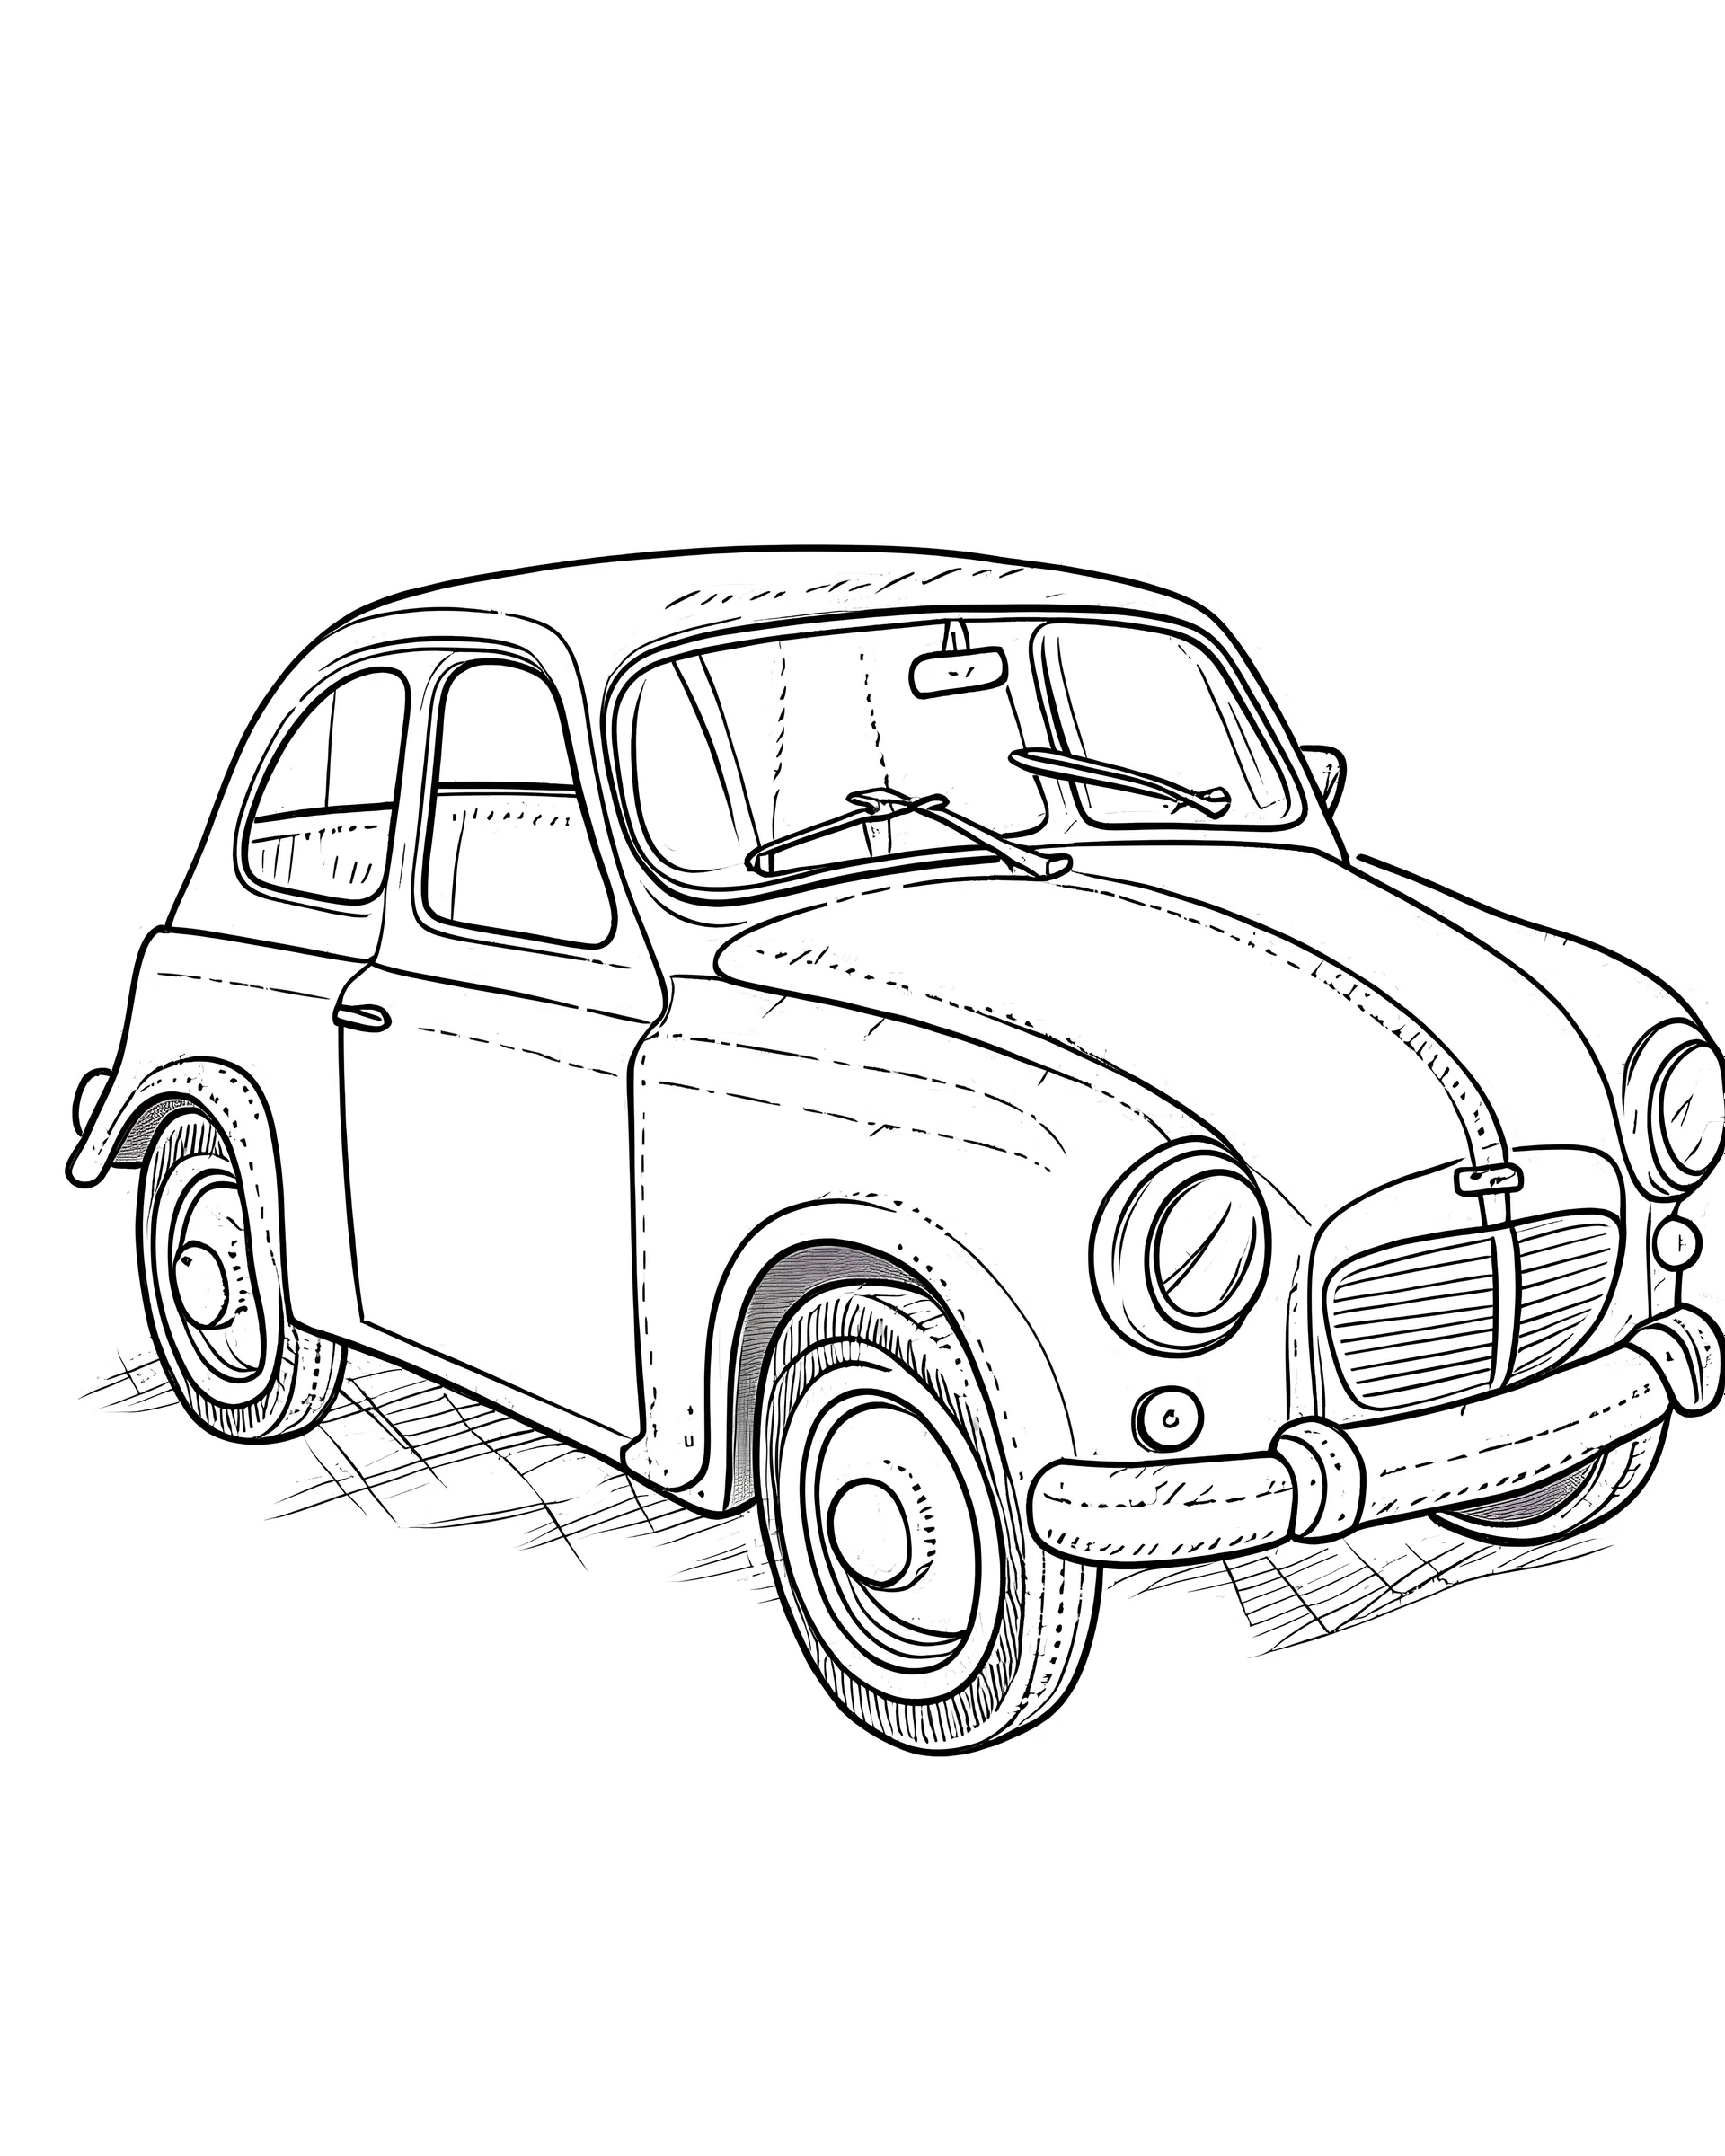 How to draw small car easy step by step-drawing show art - YouTube